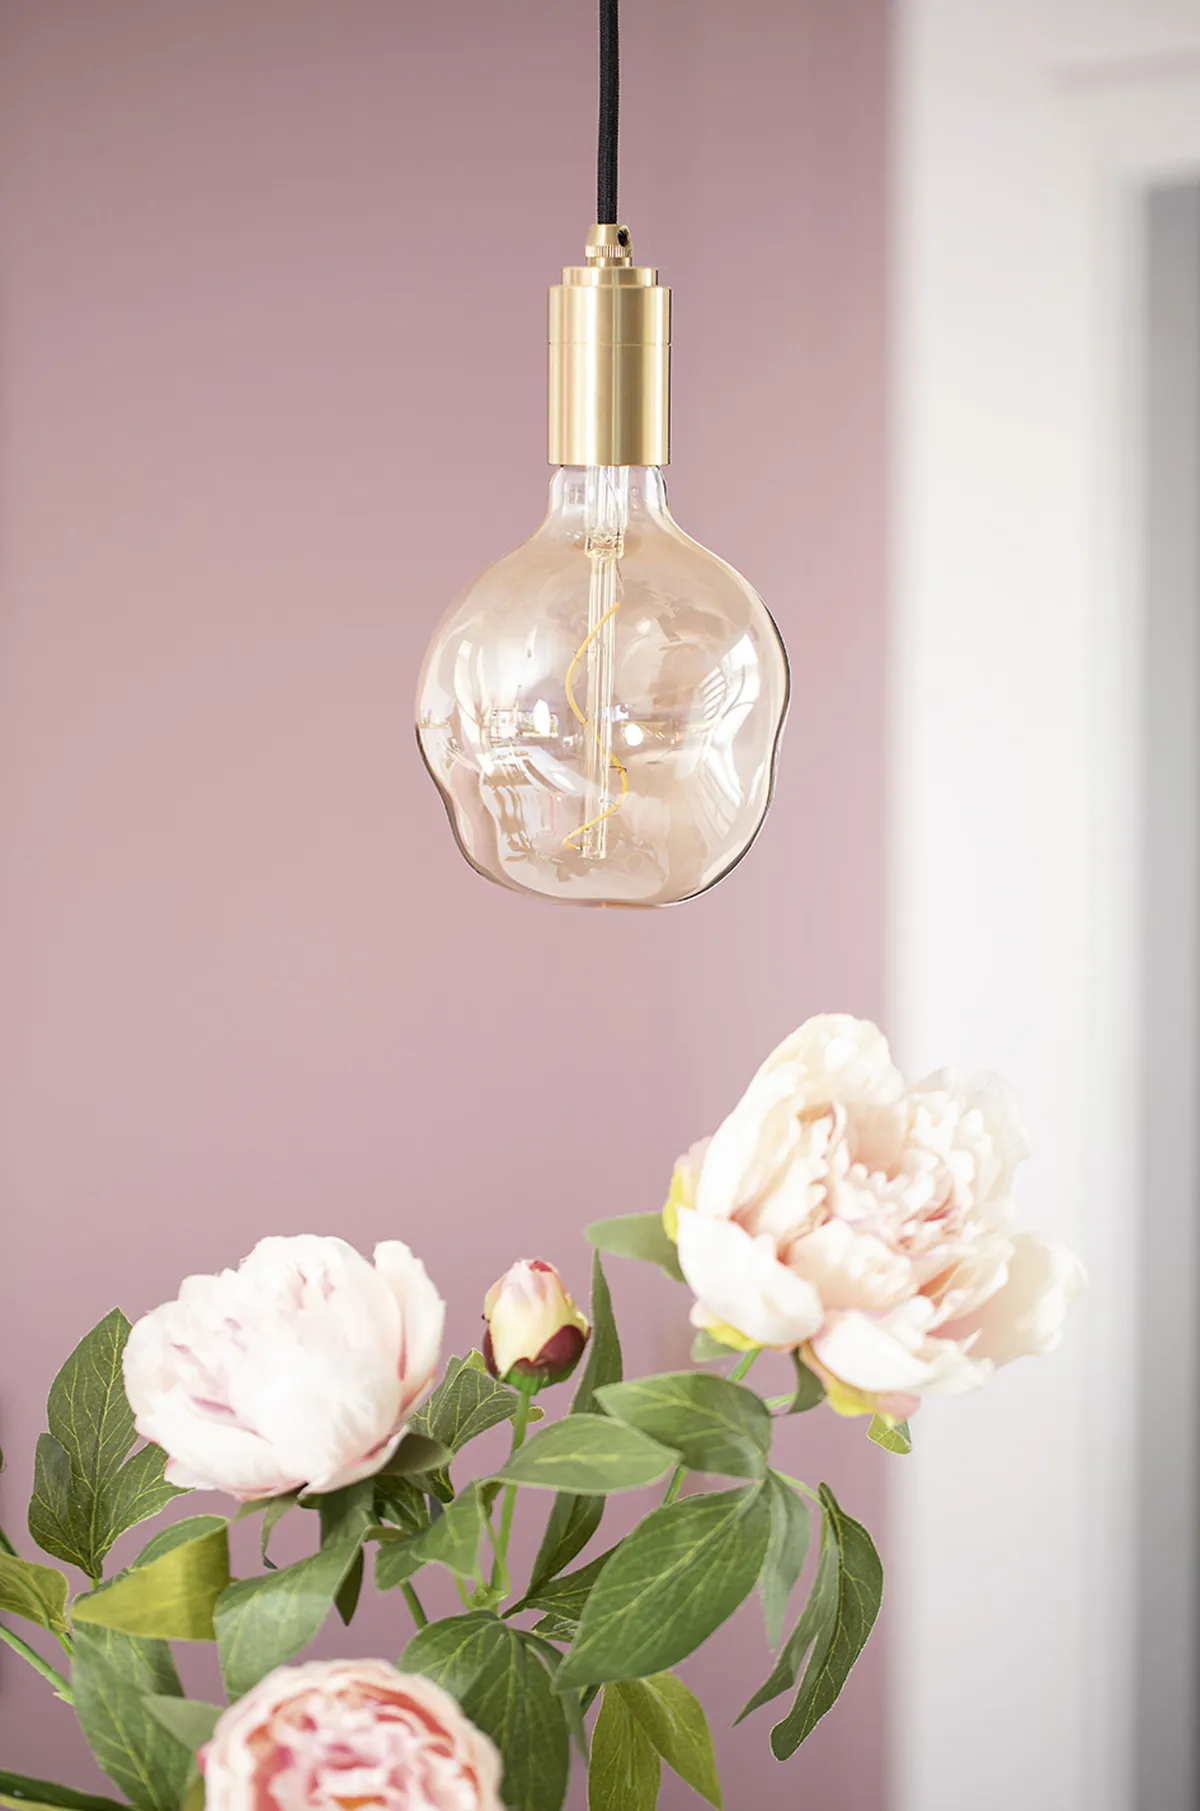 Gold pendant light in pink kitchen